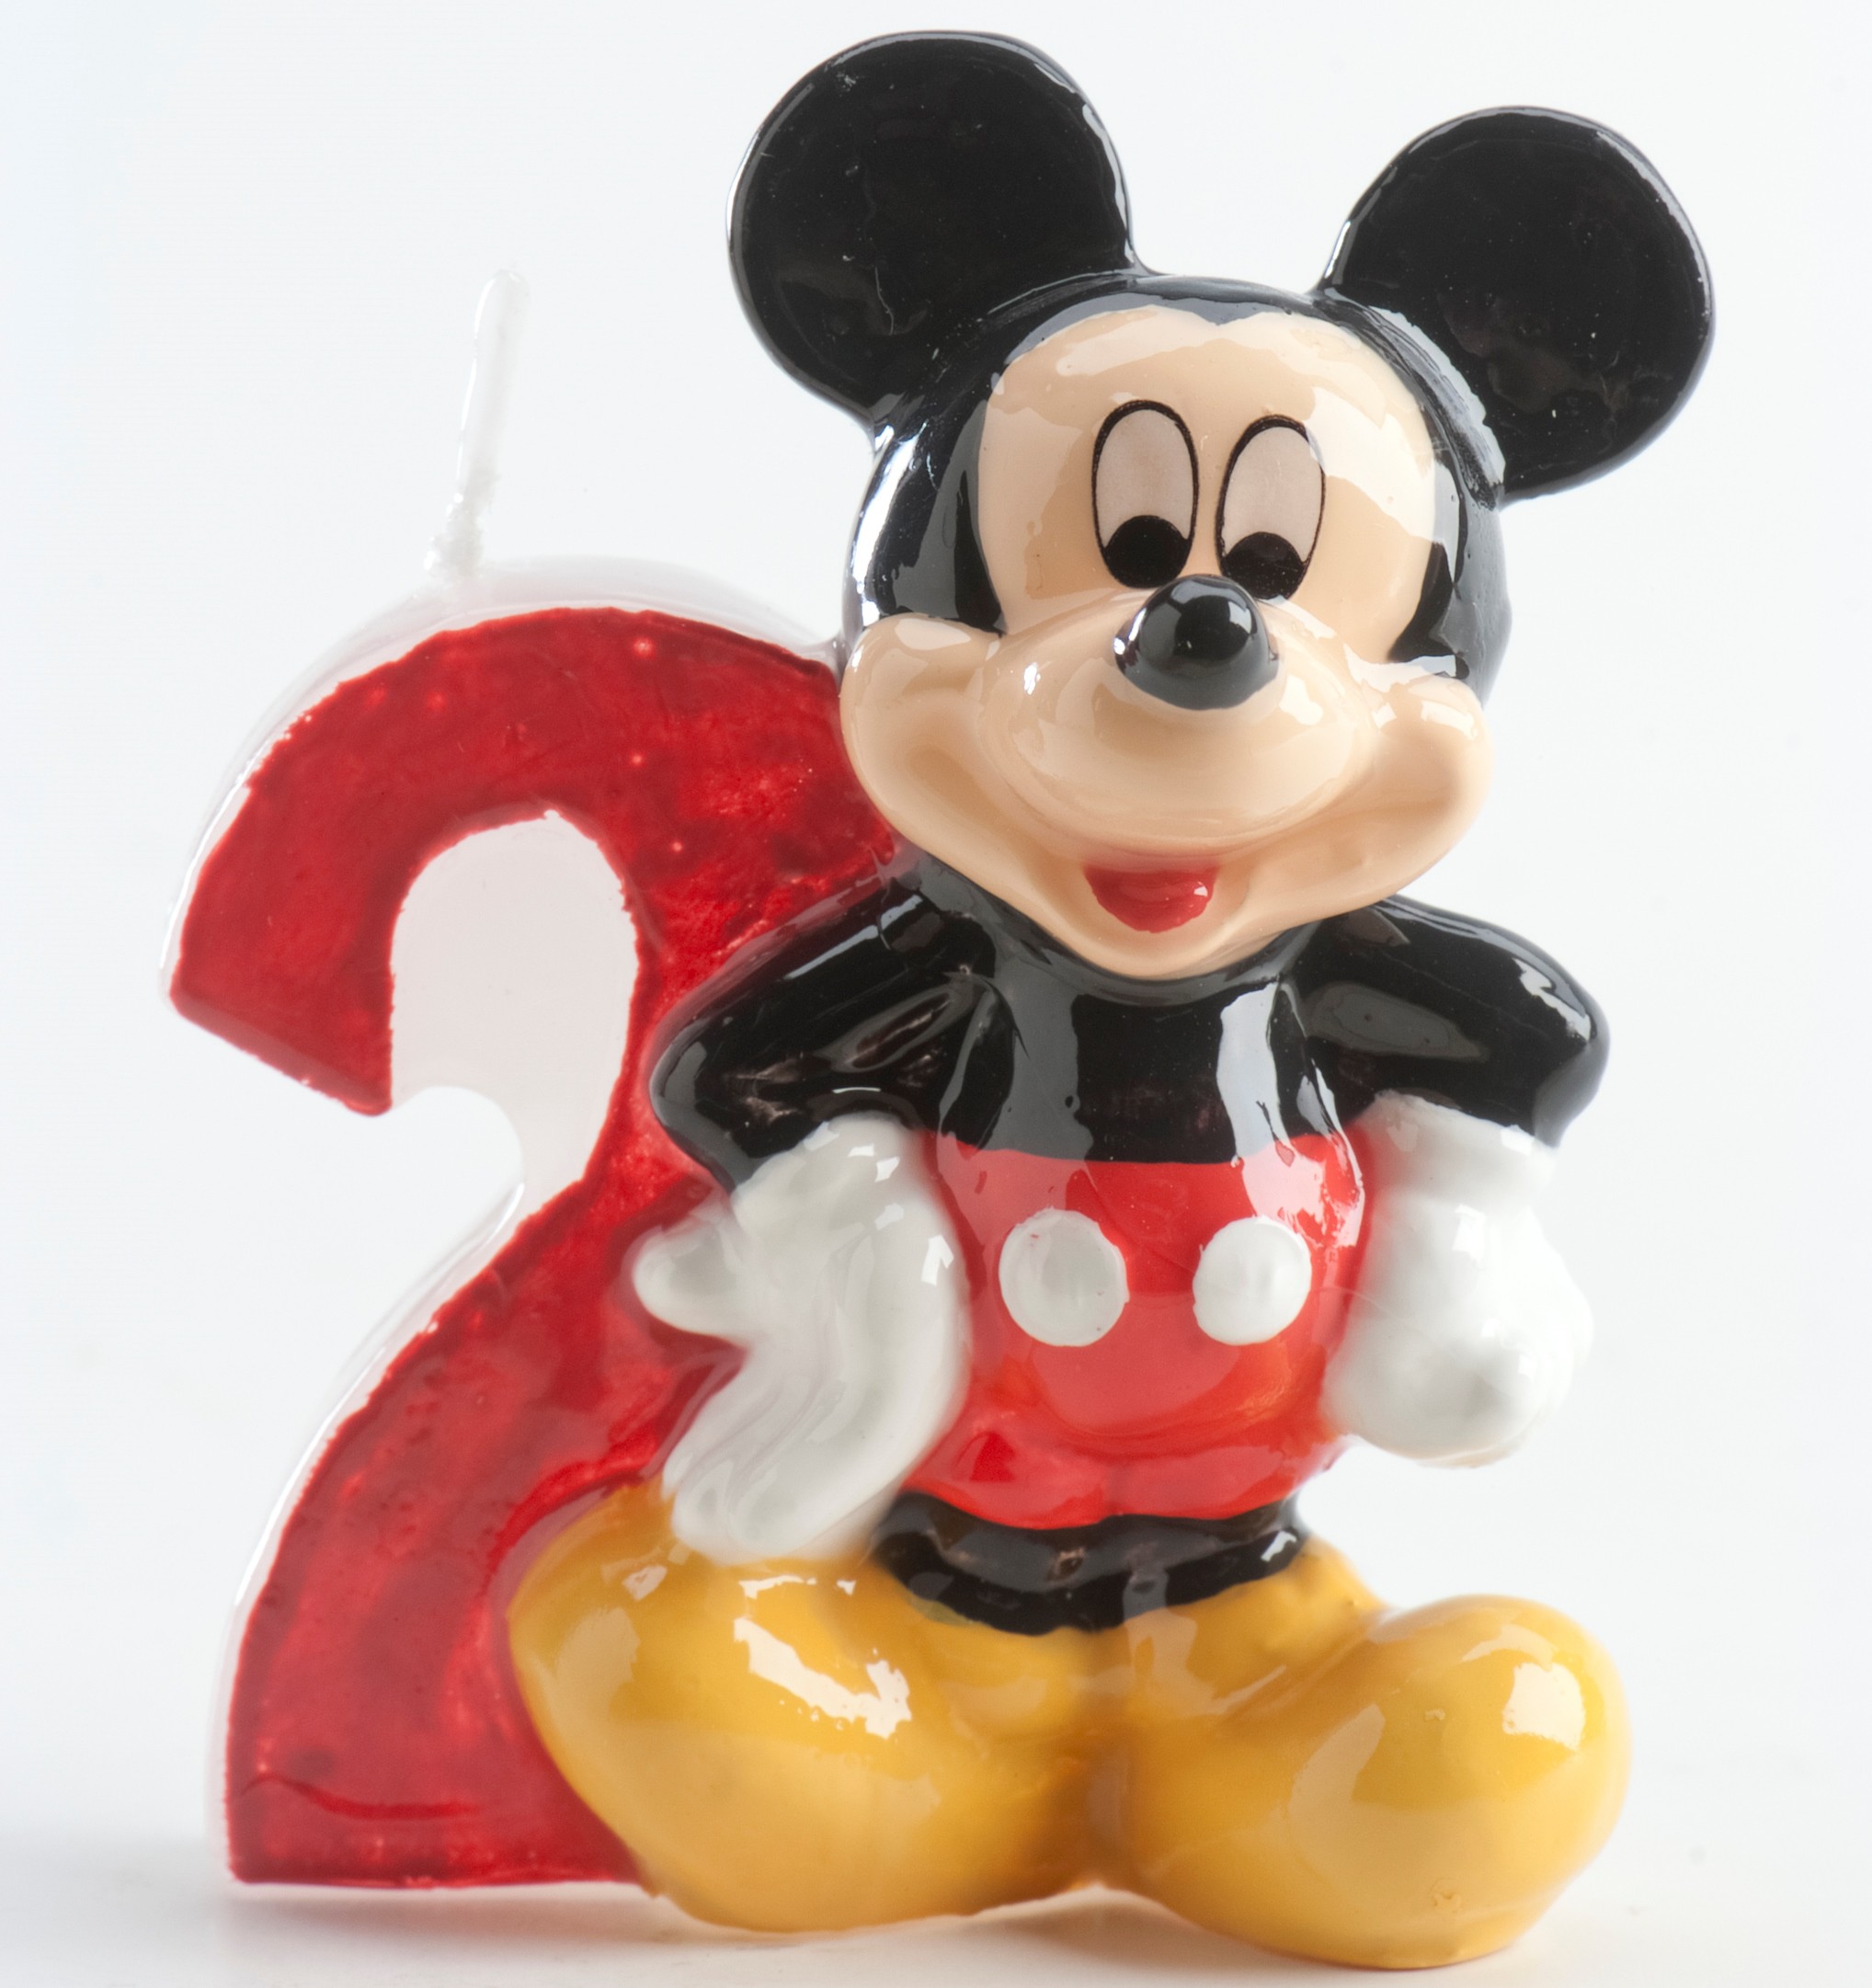 Bougie d'anniversaire Mickey Mouse - 2 ans